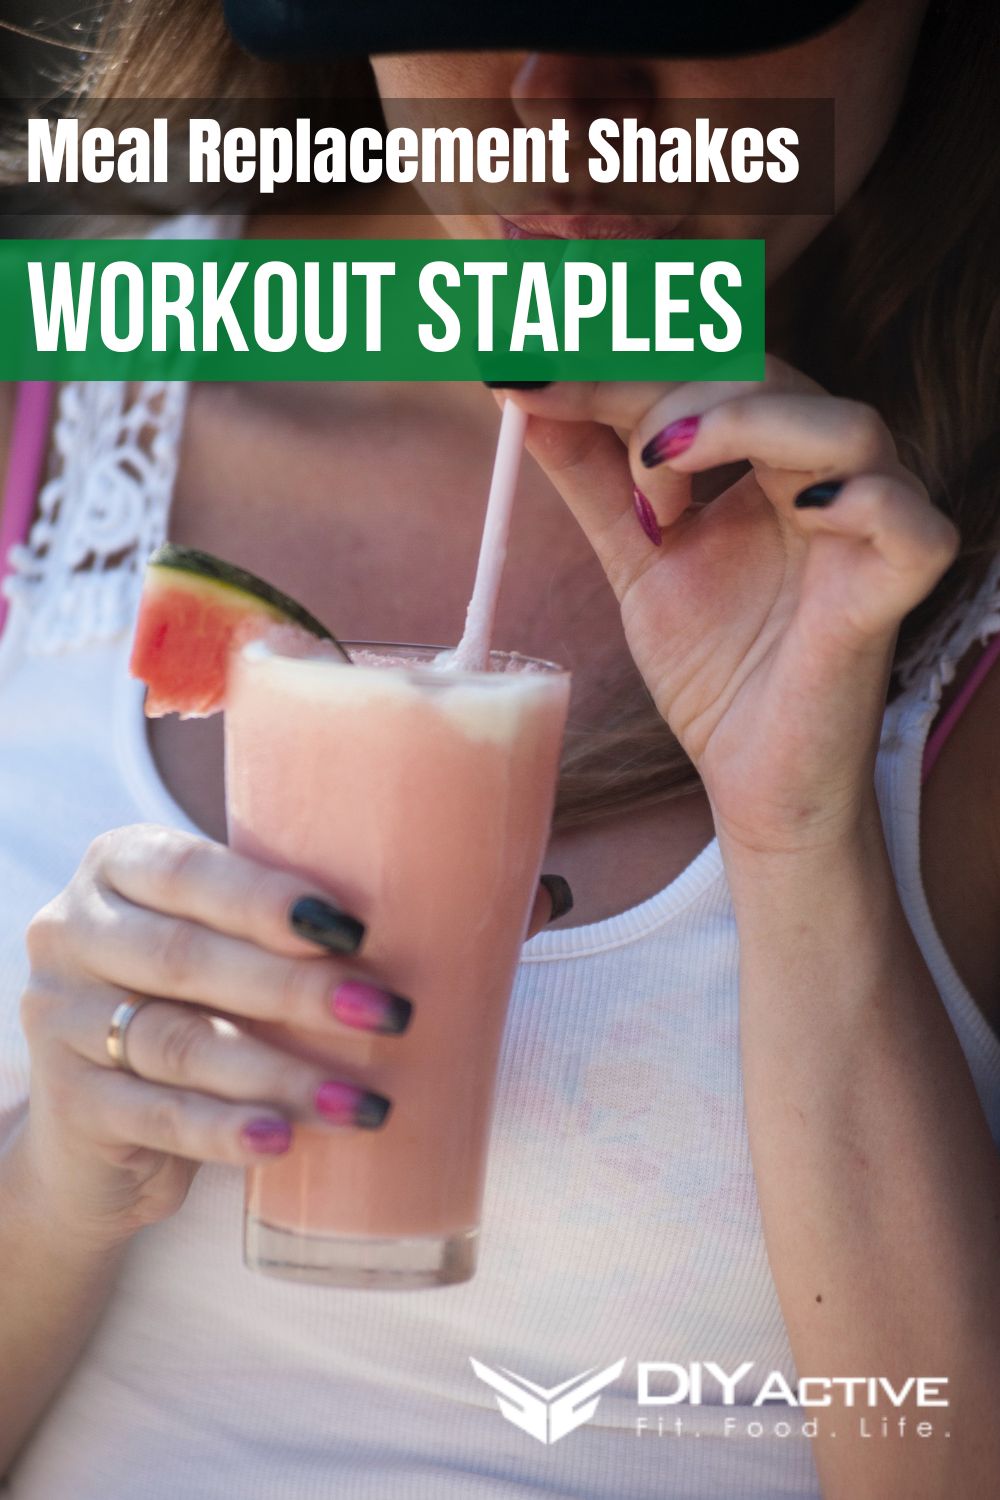 Why Meal Replacement Shakes Should be a Staple of Your Workout Regimen 2